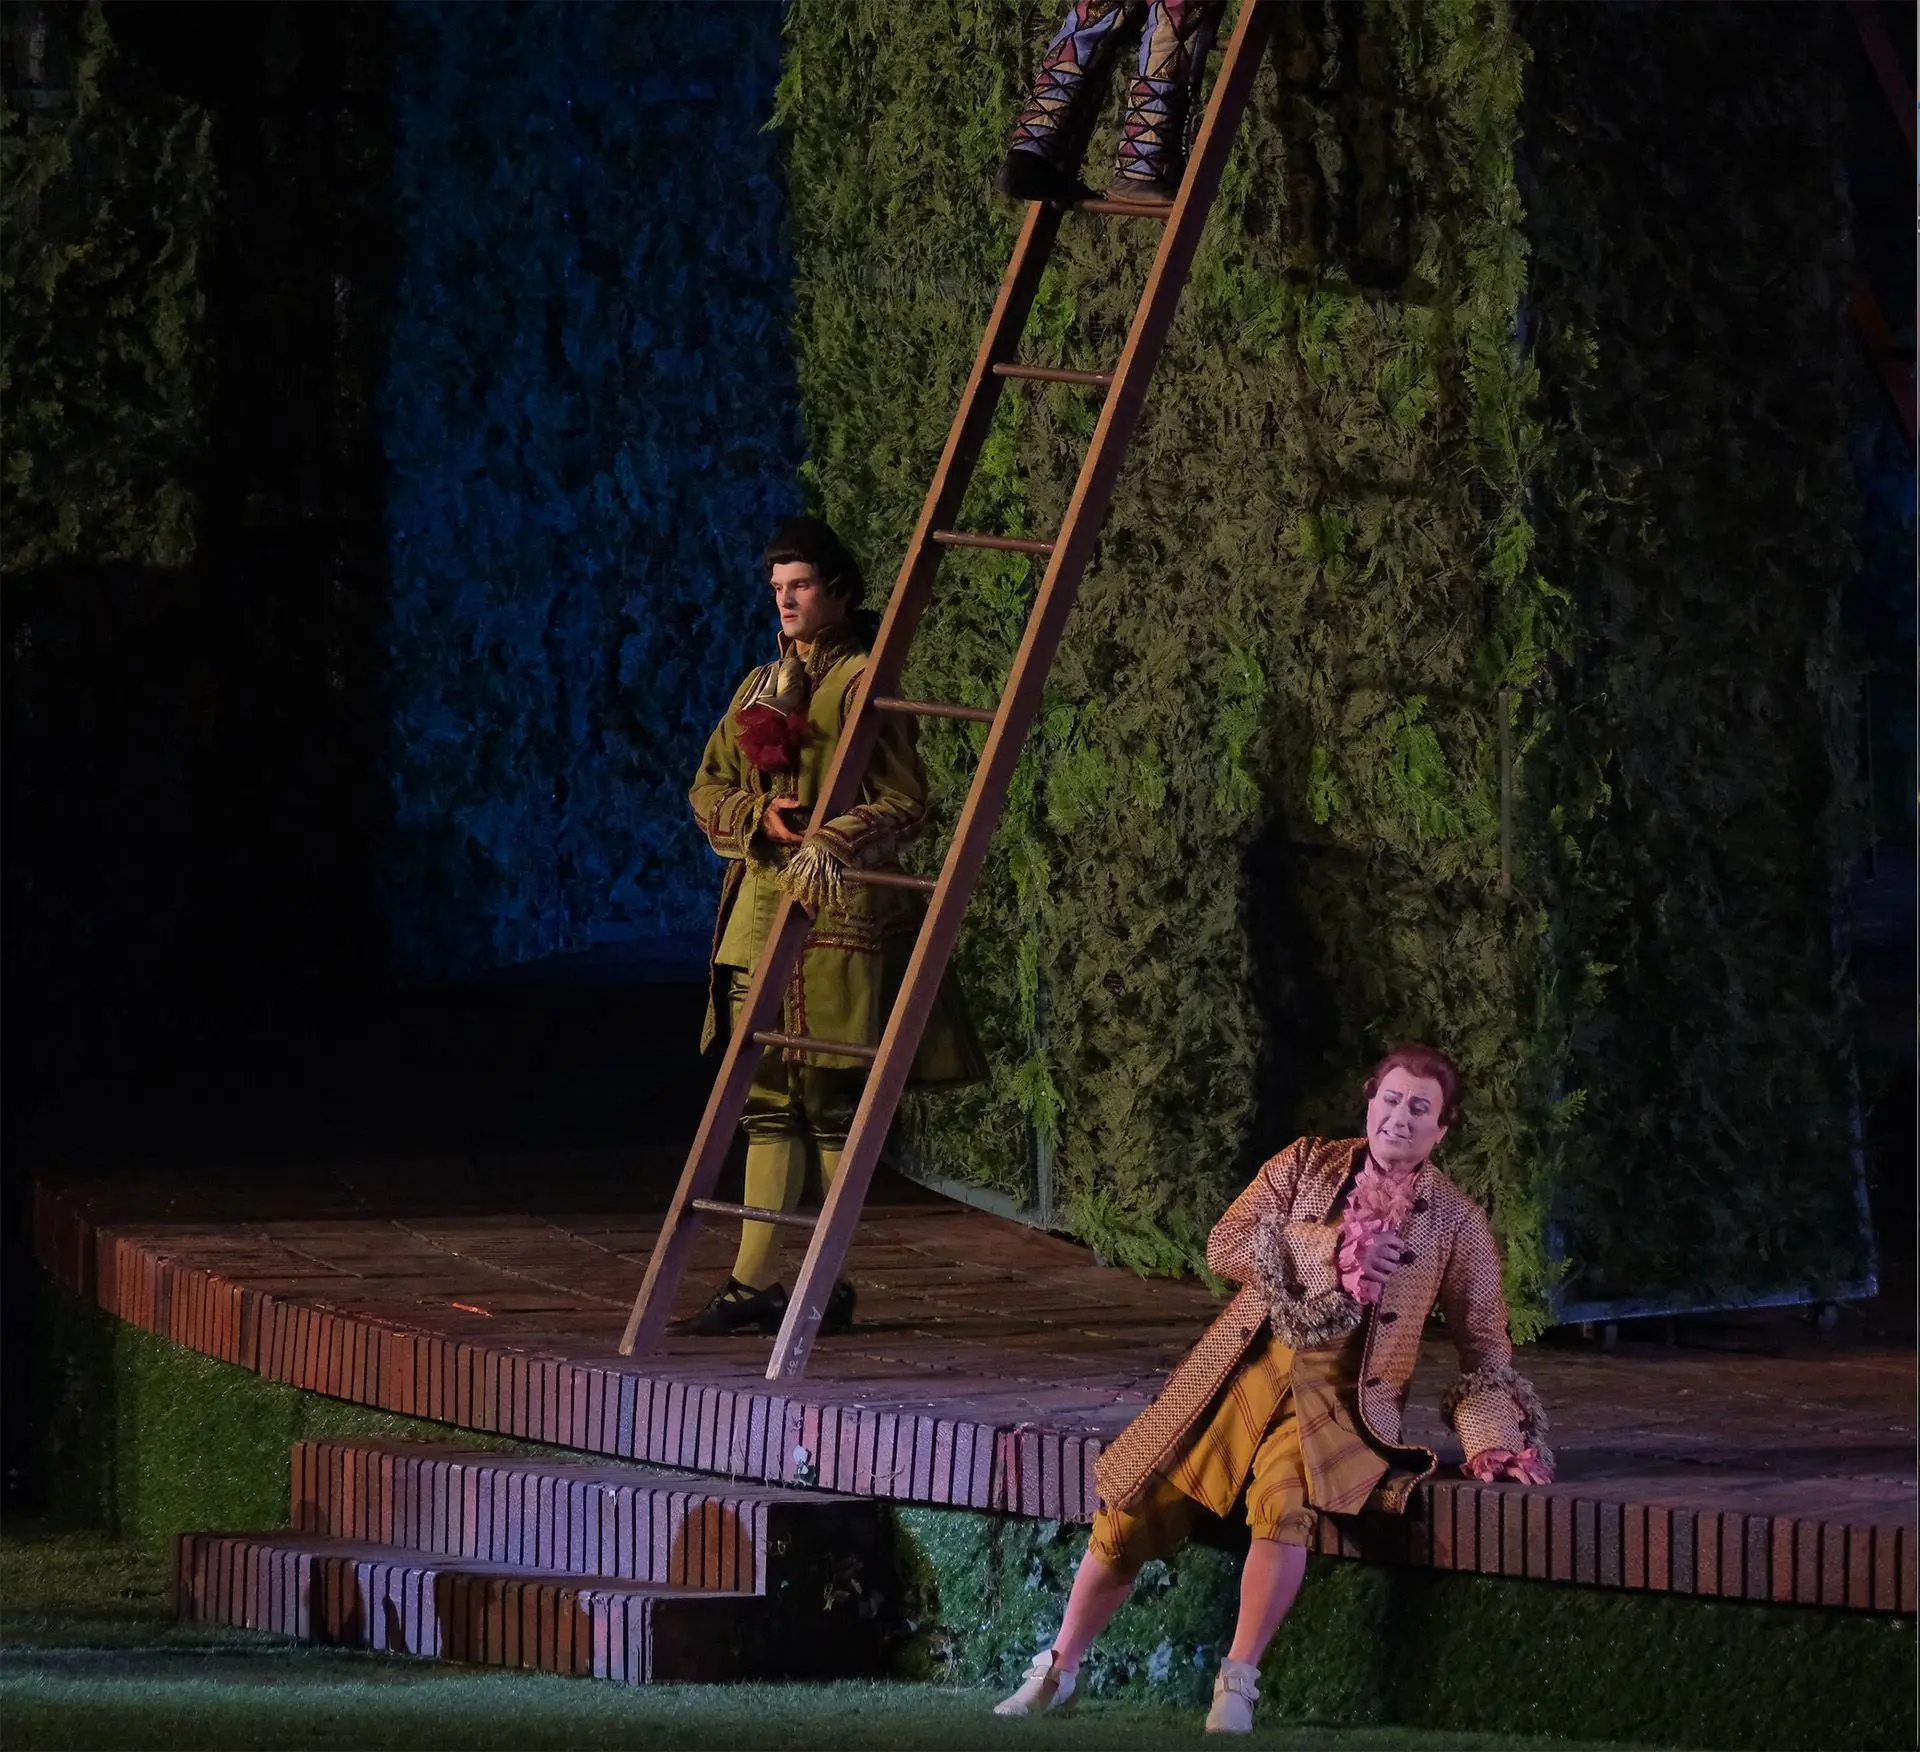 Count Almaviva is in front of the labyrinth, sitting upon a raised circular structure. His right arm is across his chest. To his right there is a wooden ladder leaning against a hedge held by a supernumerary. The man is dressed in a suit with a waistcoat, a coat and breeches made of dark green satin with burgundy decorations. He is wearing a dark chestnut brown wig with the hair pulled to the back. Count Almaviva is wearing a cotton suit that is yellow ocher in color with thin brown and dark red stripes. The waistcoat comes down below the waistline and is buttoned in front, while his breeches are knee length with red stockings beneath. Over his waistcoat, he is wearing a padded jacket made of heavy cotton, which is yellow ocher in color with dark red polka dots. The wrists of his shirt have pink ruffles and his shirt has a pink jabot ruffle around the neck. On his feet he is wearing squarish white shoes with a low heel that have a large gold buckle above the neck of the foot. He is wearing a chestnut colored wig with the hair pulled back and tied in a tail with a ribbon.